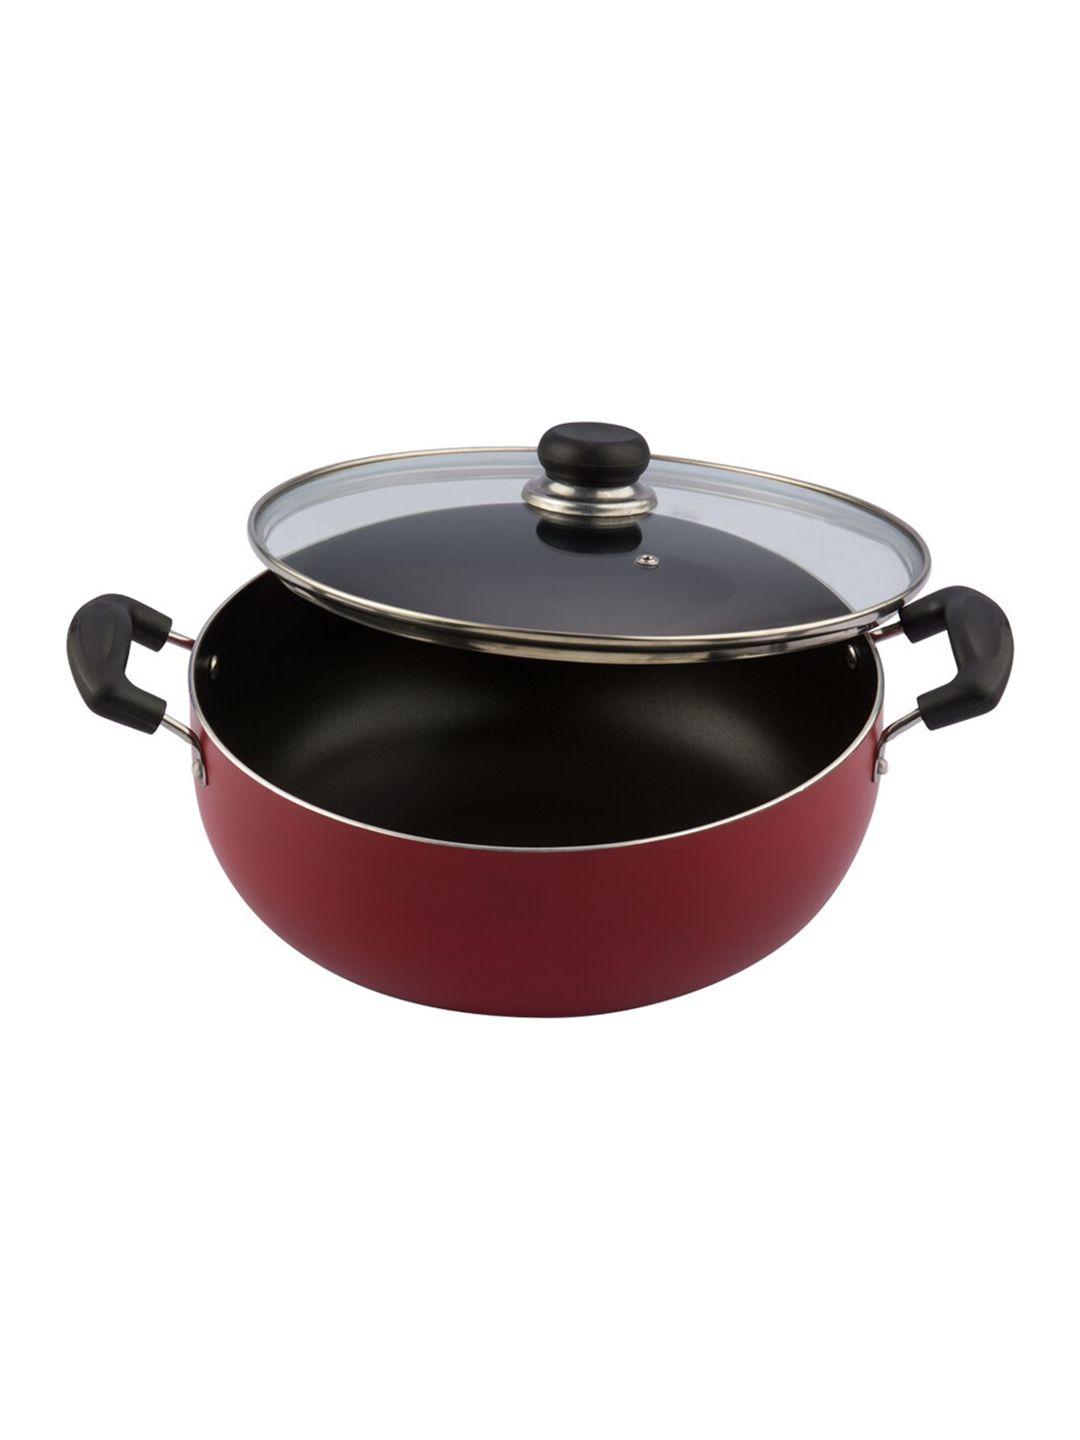 Vinod Red & Black Solid Non-Stick Induction Base Deep Kadai with Lid Cookware Price in India